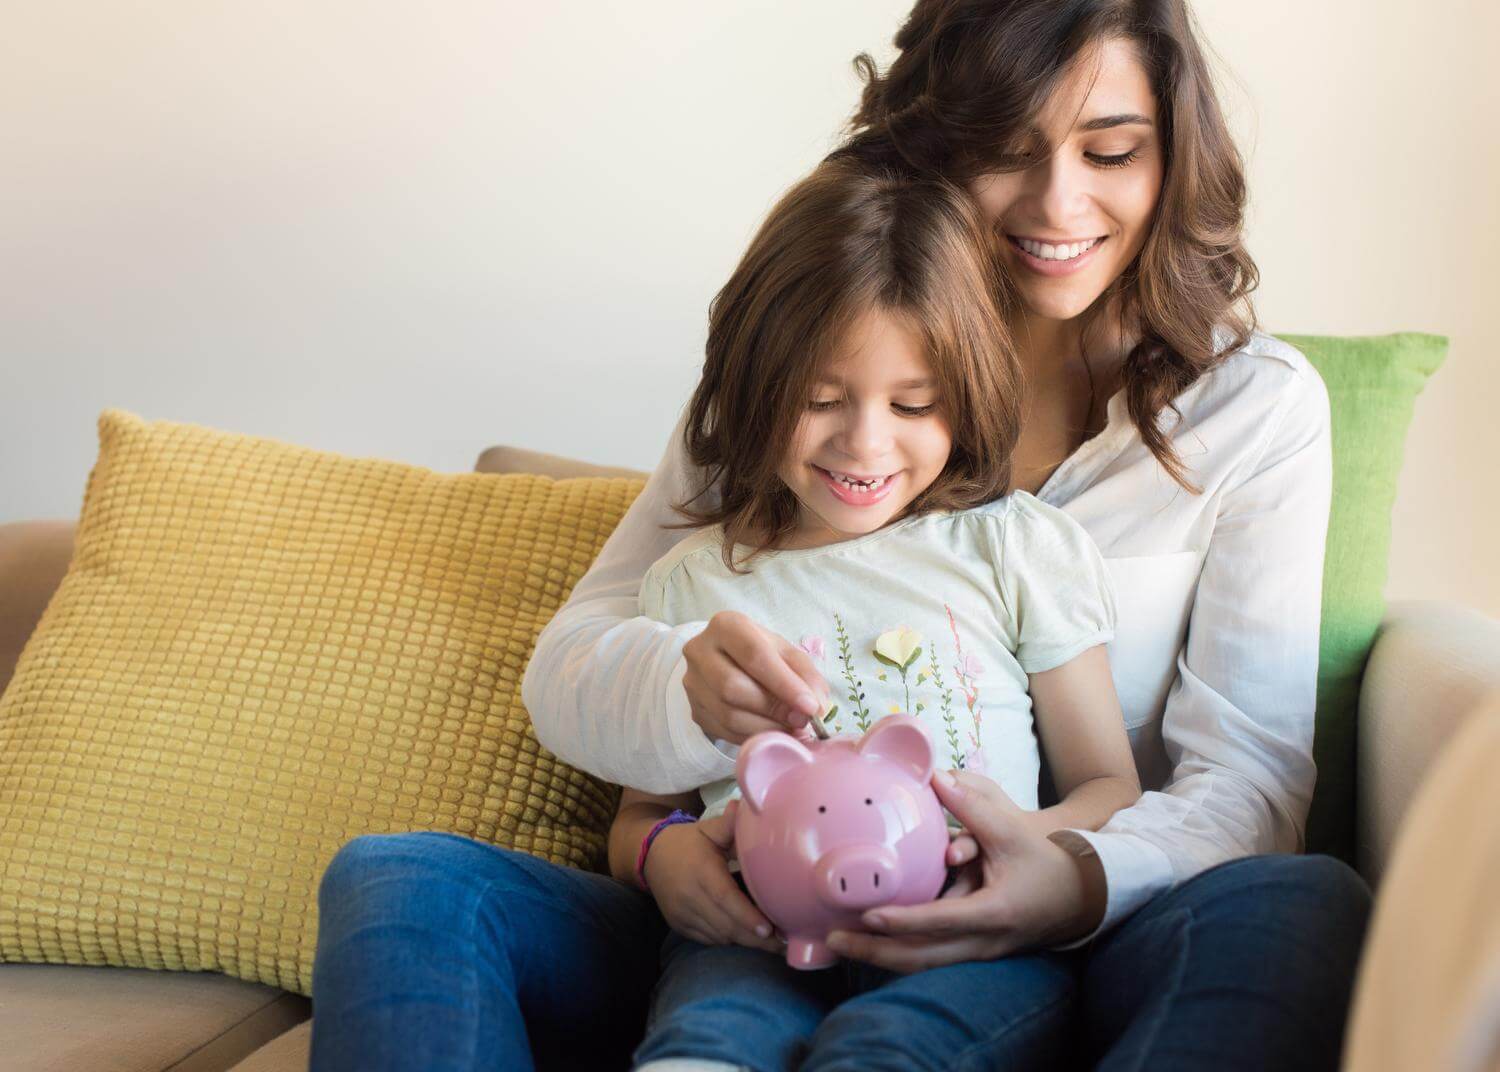 Mom and young daughter, smiling, holding a pink piggy bank